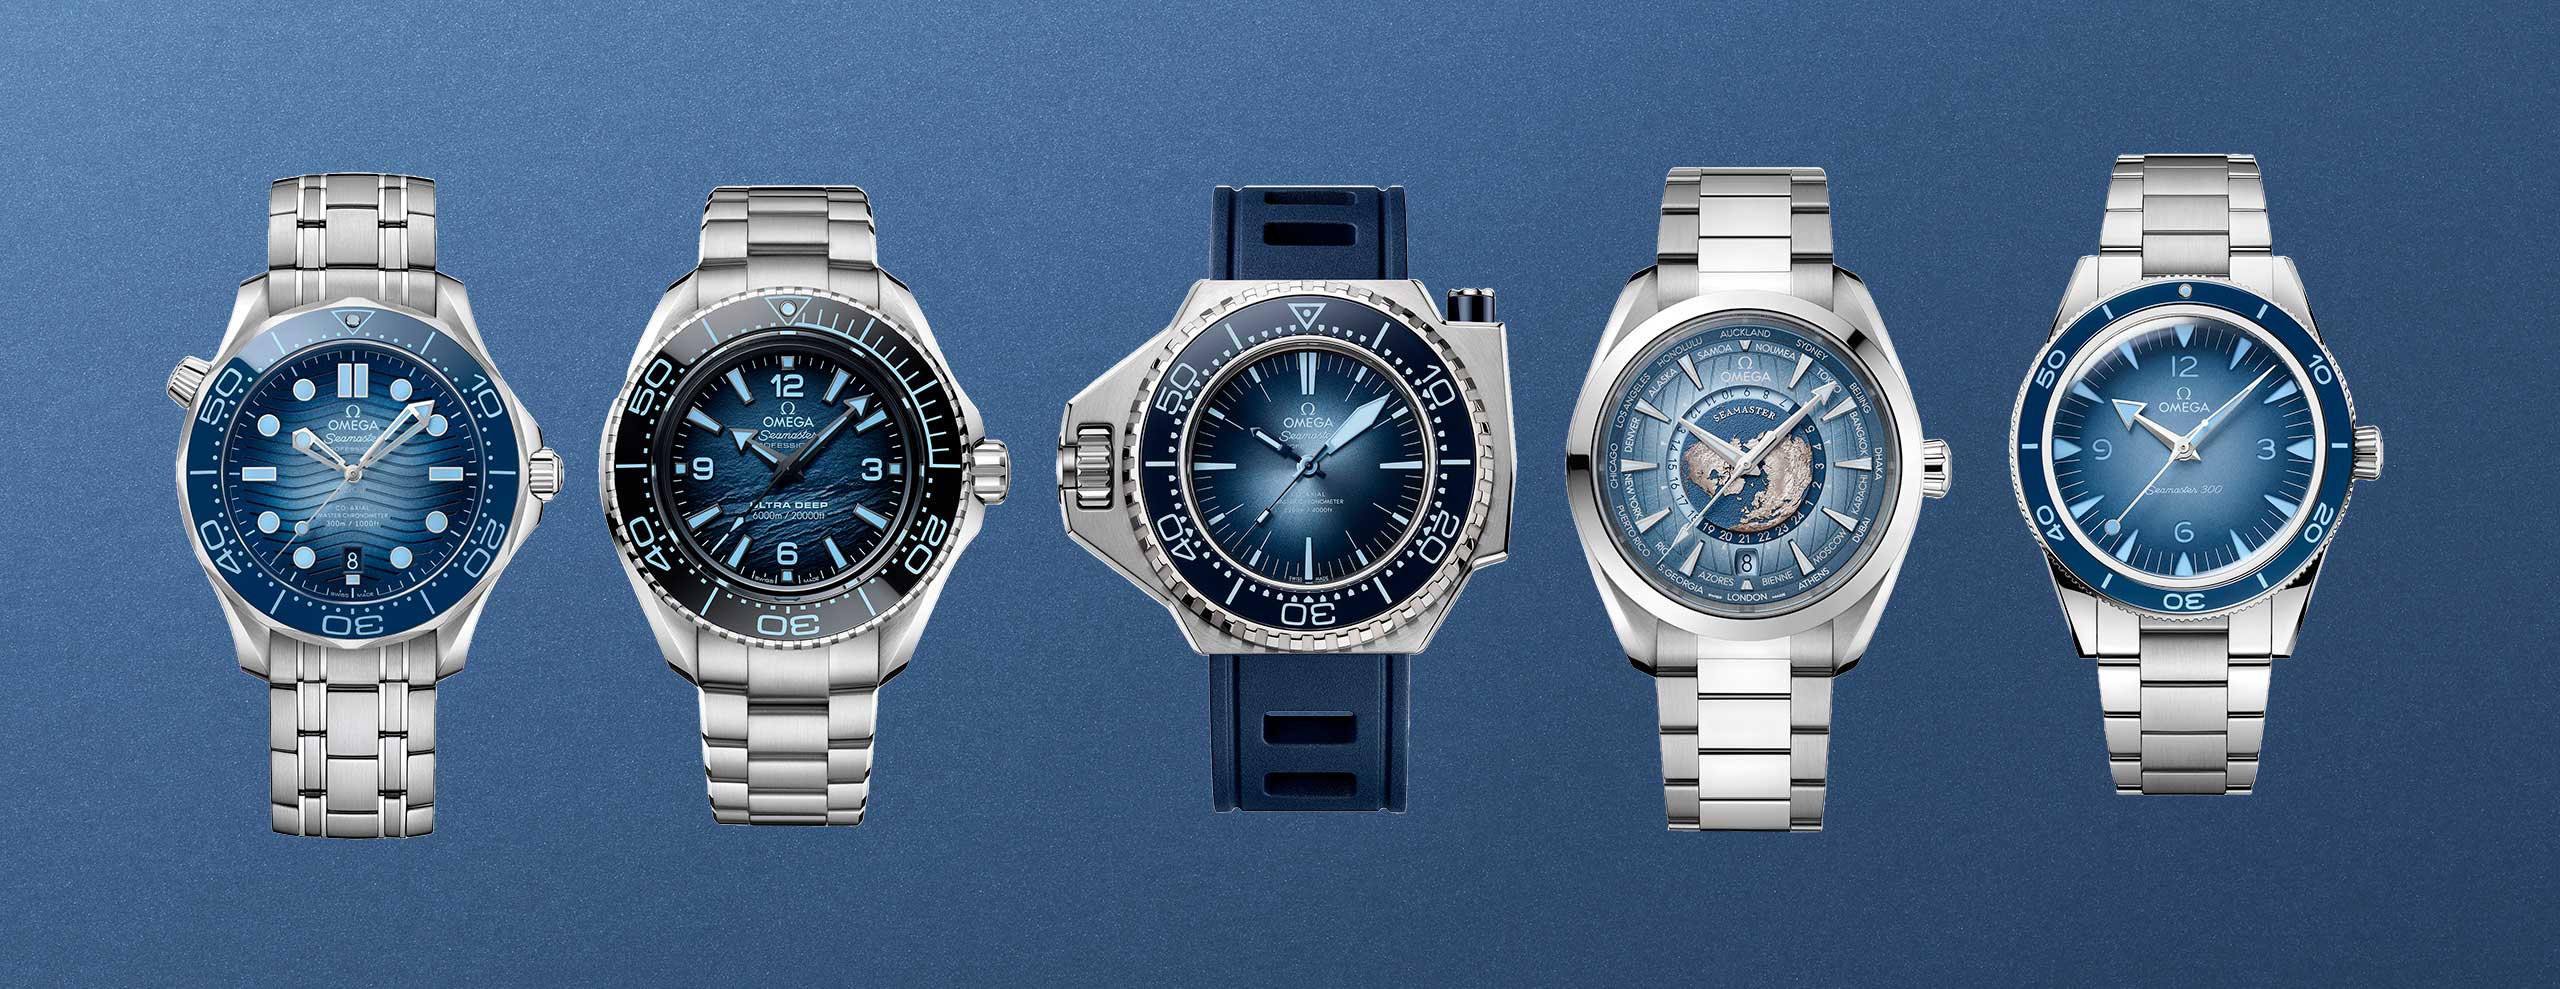 Key Highlights of the Omega Seamaster 75th Anniversary Models | Everest ...